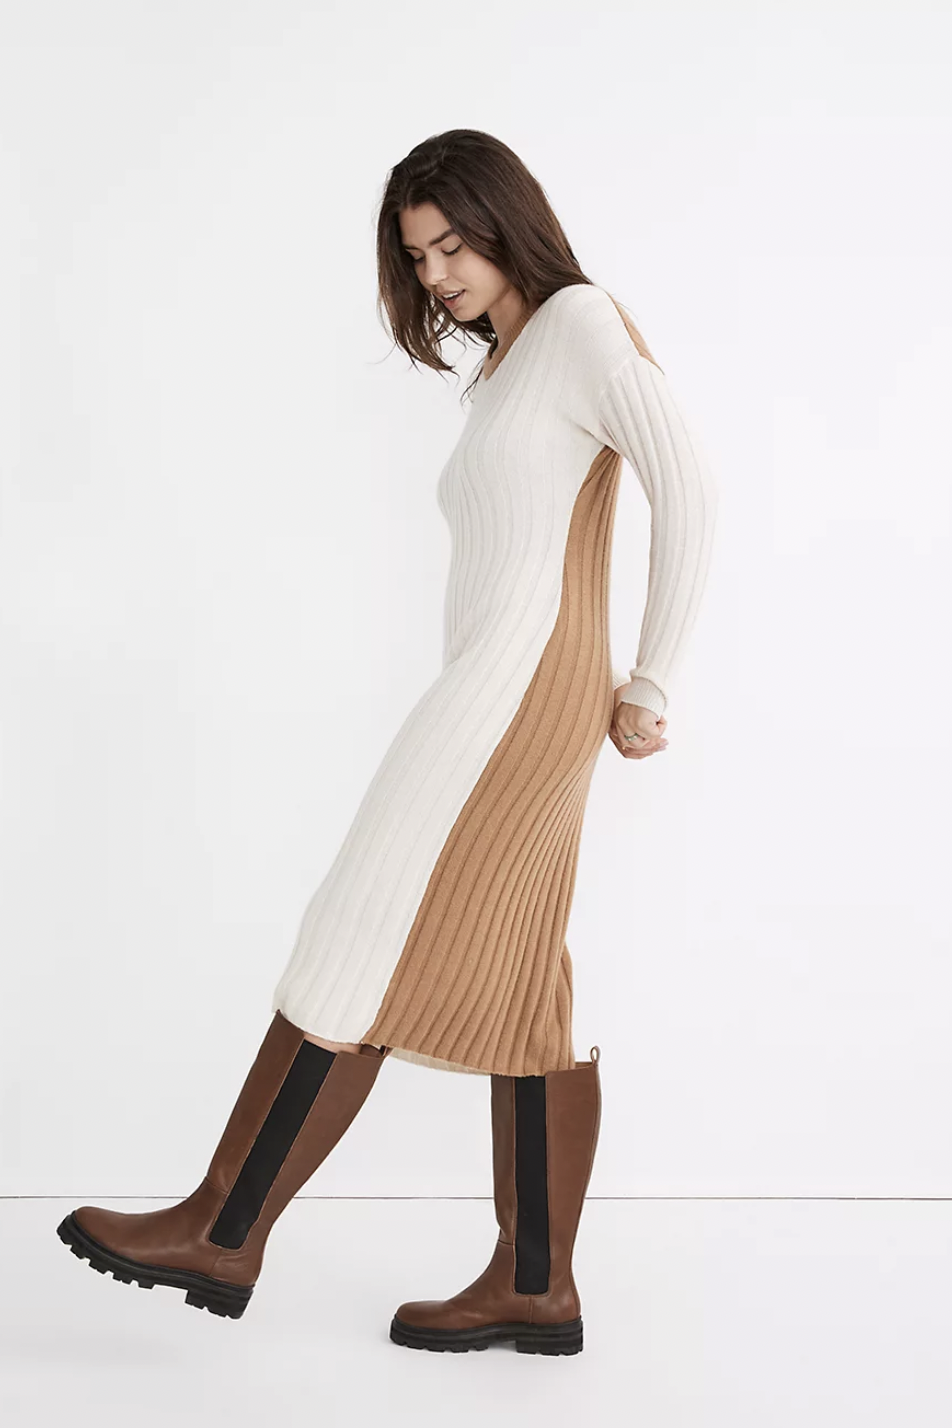 Great idea! Turtleneck & tights under summer dress. (See if for